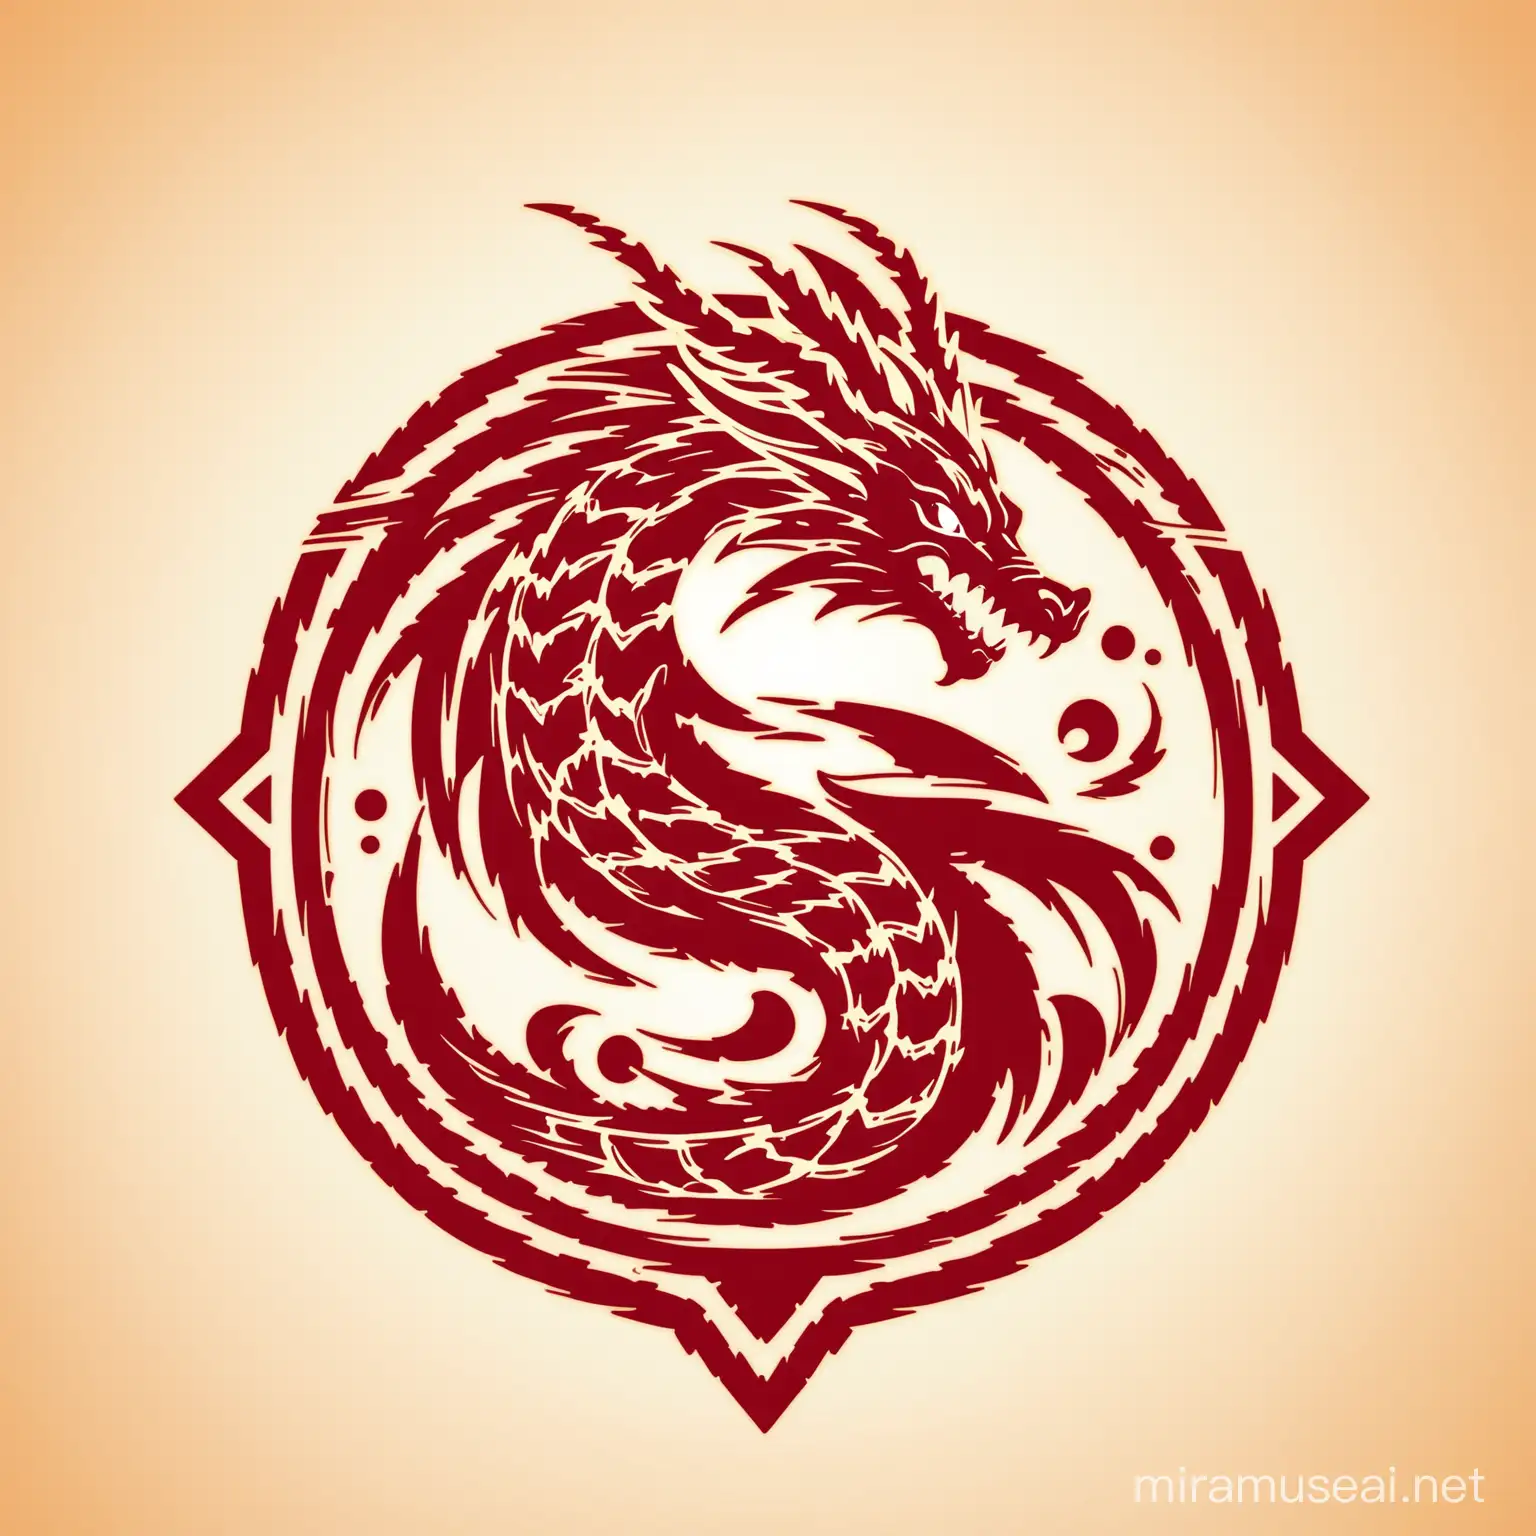 Mystical Dragon Emblem with Fiery Wings and Golden Scales